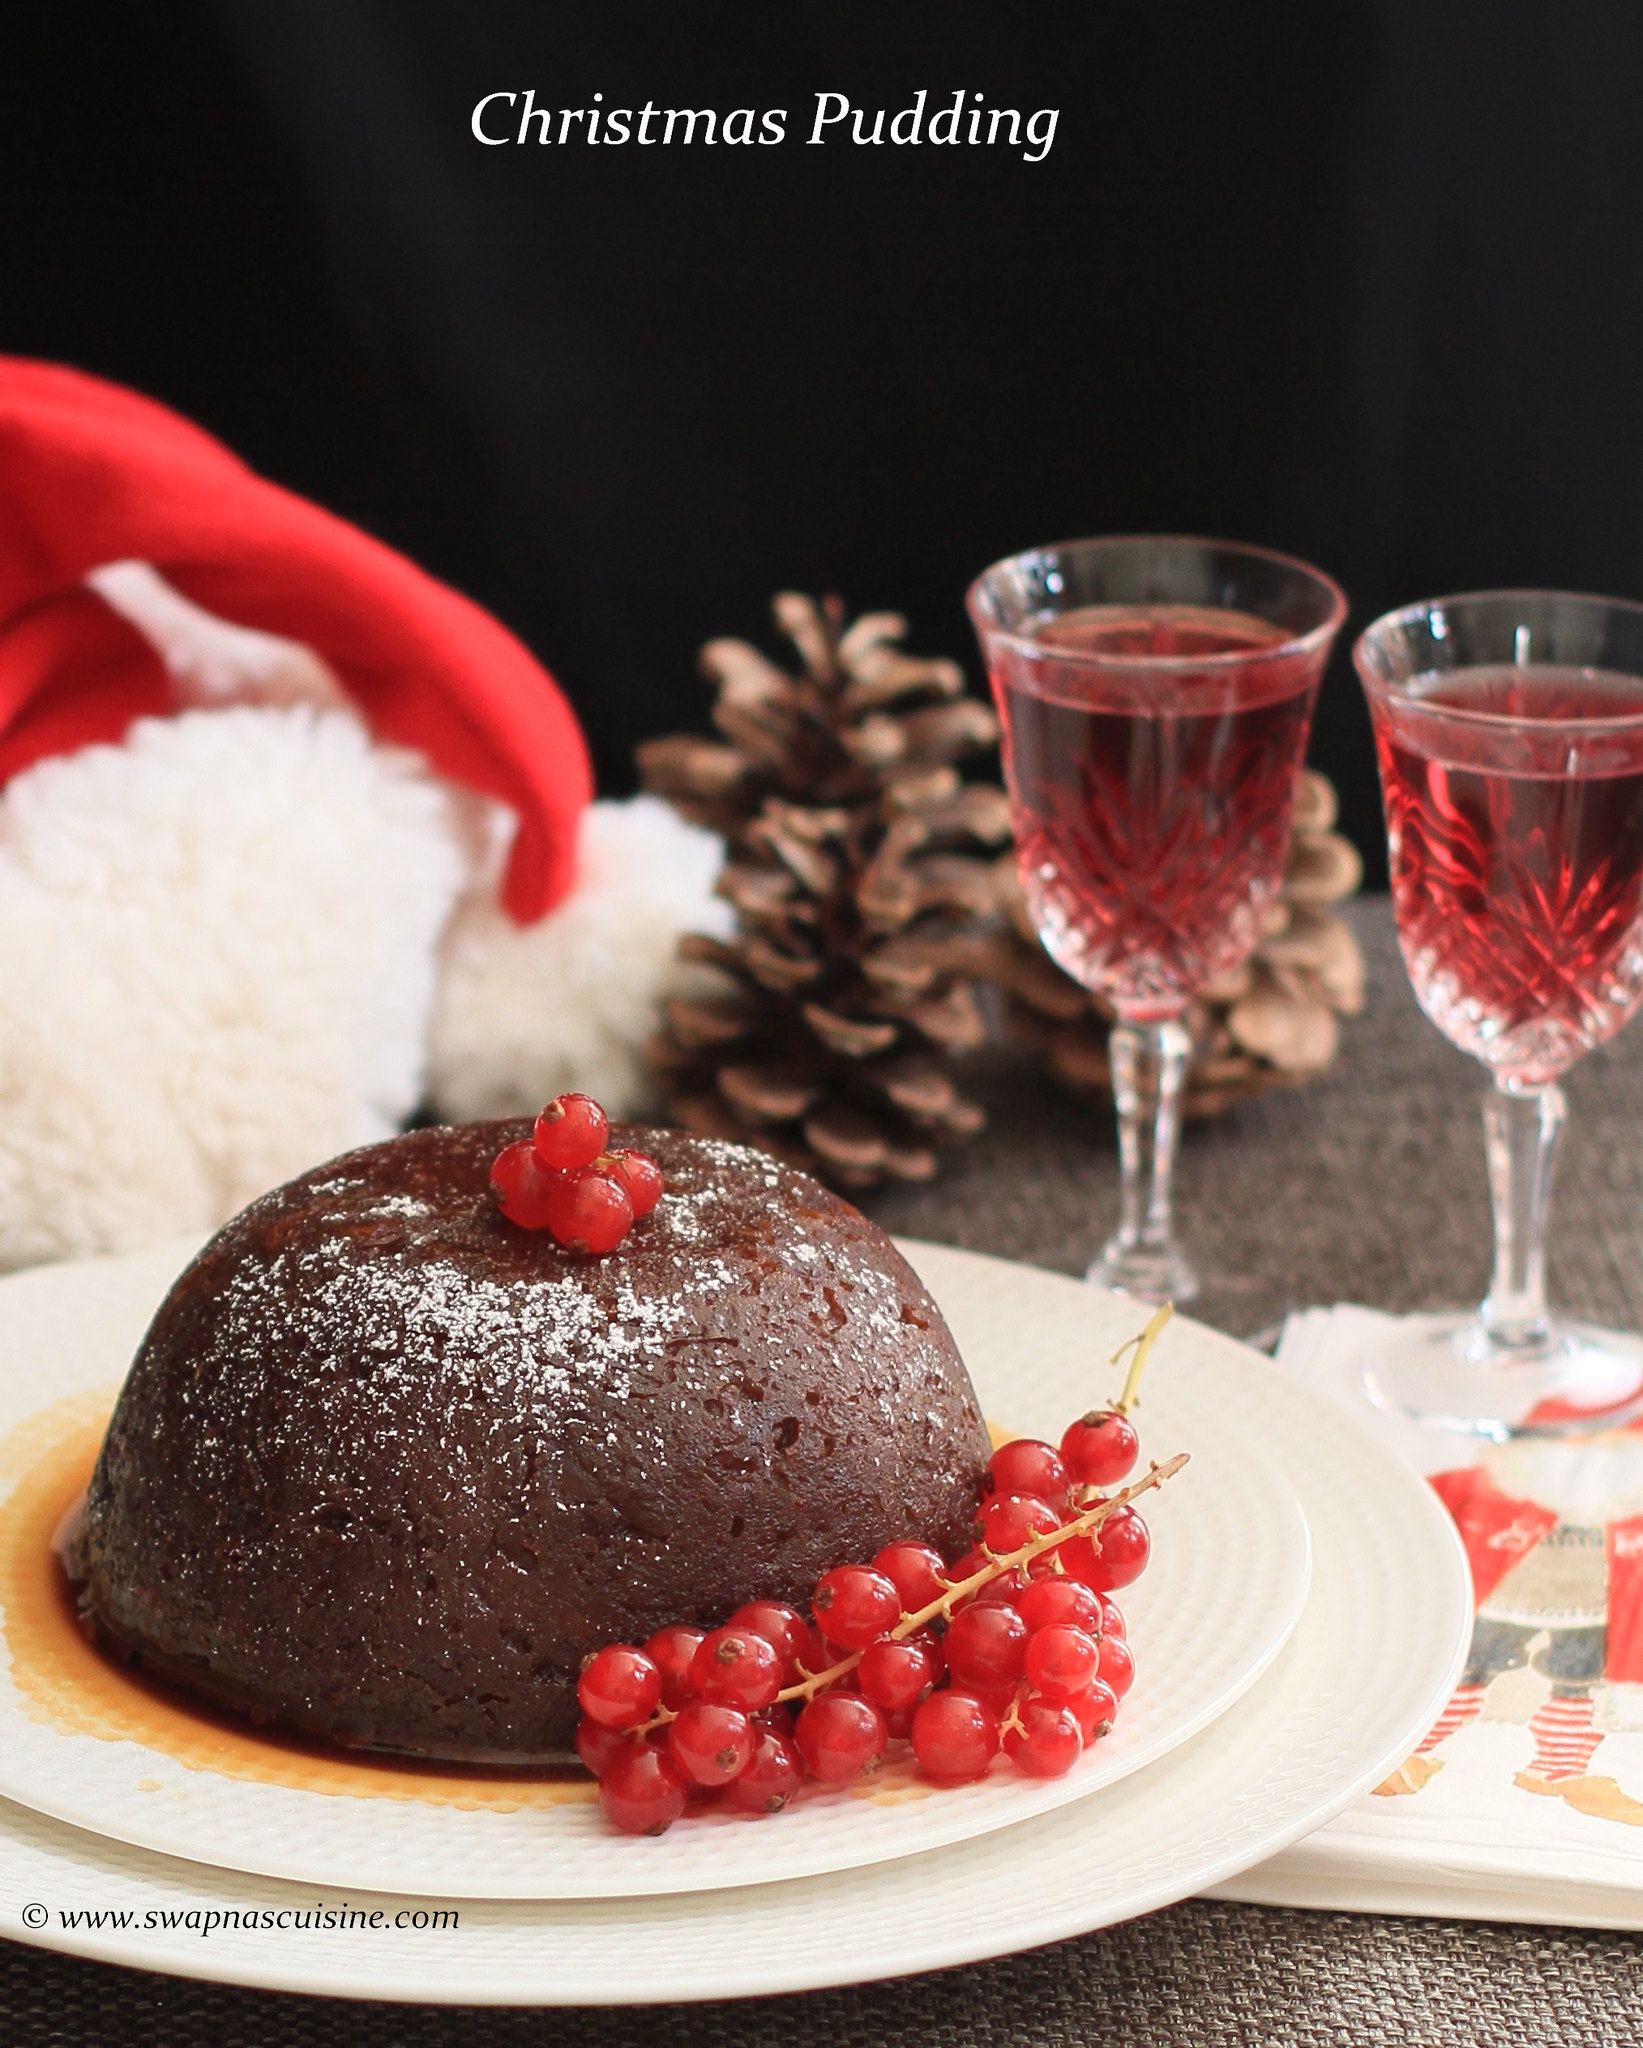  How to make Christmas Pudding without Suet